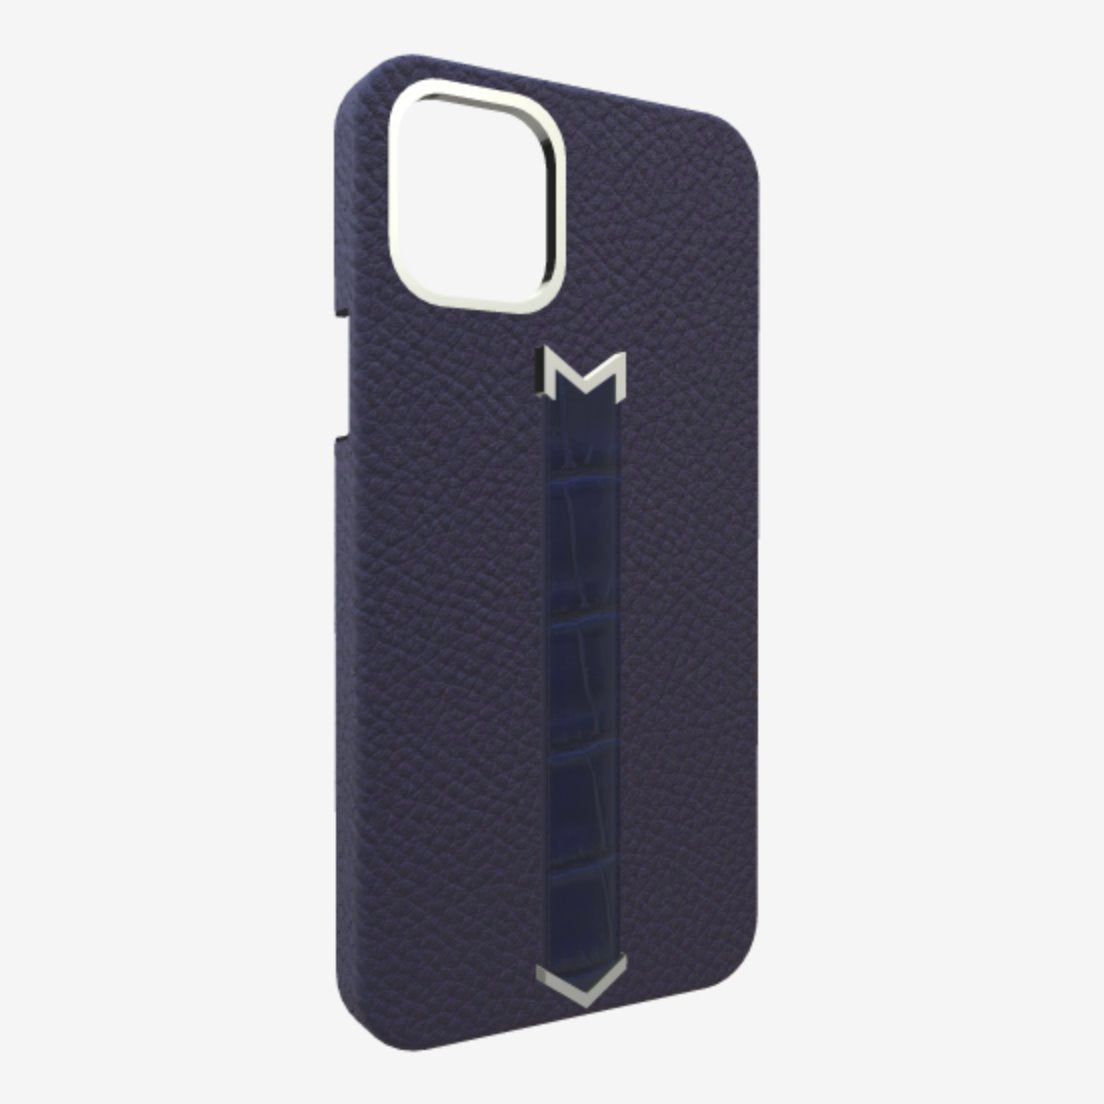 Silver Finger Strap Case for iPhone 13 Pro Max in Genuine Calfskin and Alligator Navy-Blue Navy-Blue 